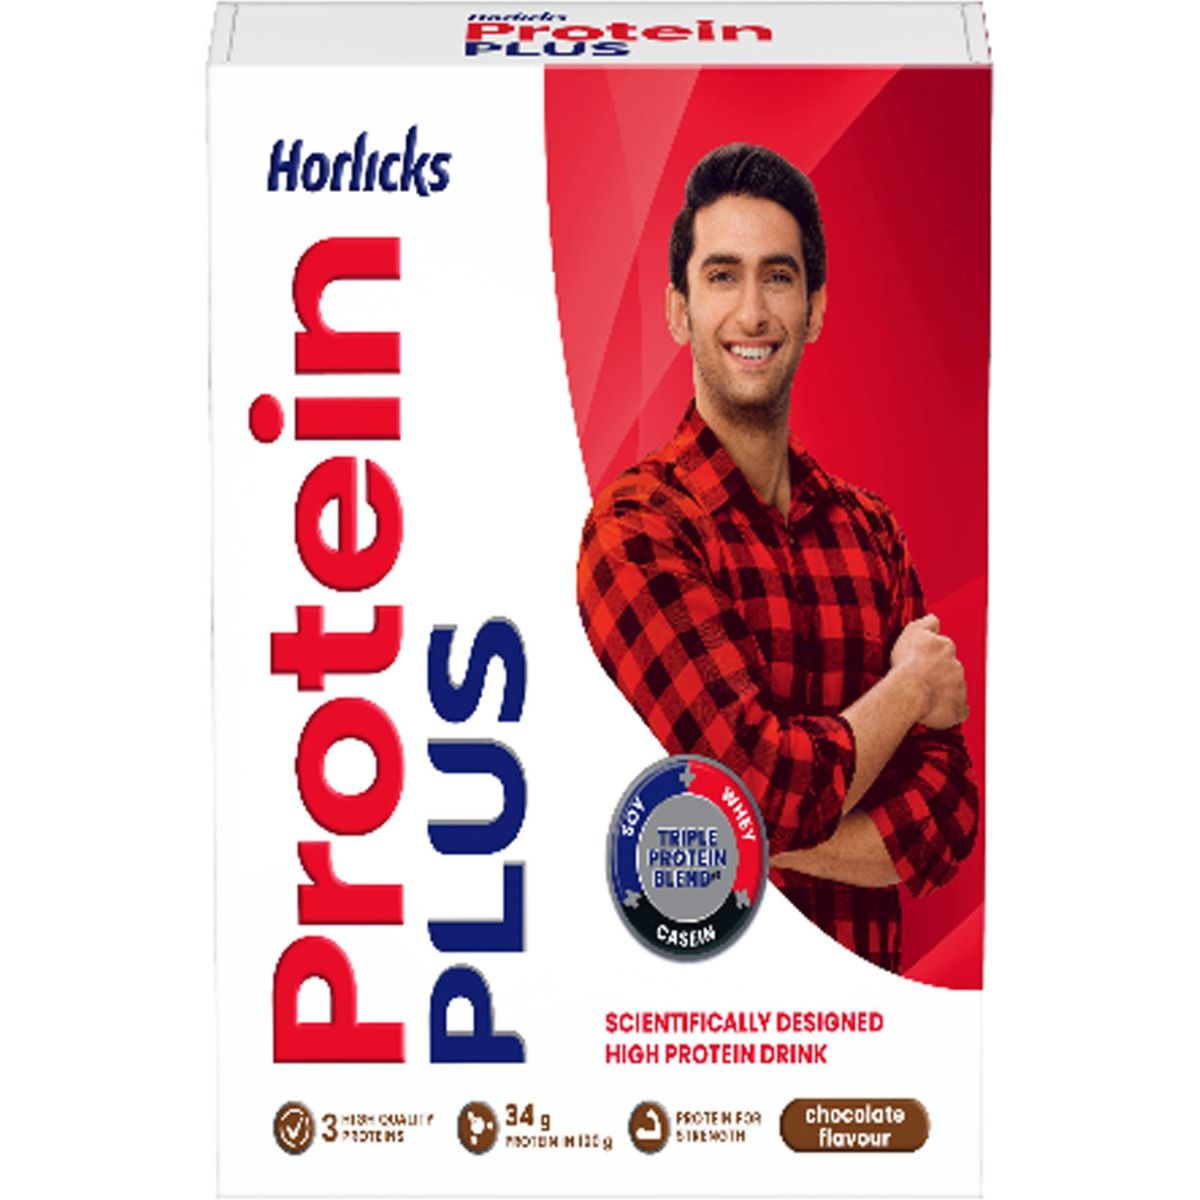 Horlicks Protein+ Chocolate Flavoured Health and Nutrition Drink, 200 gm Refill Pack, Pack of 1 